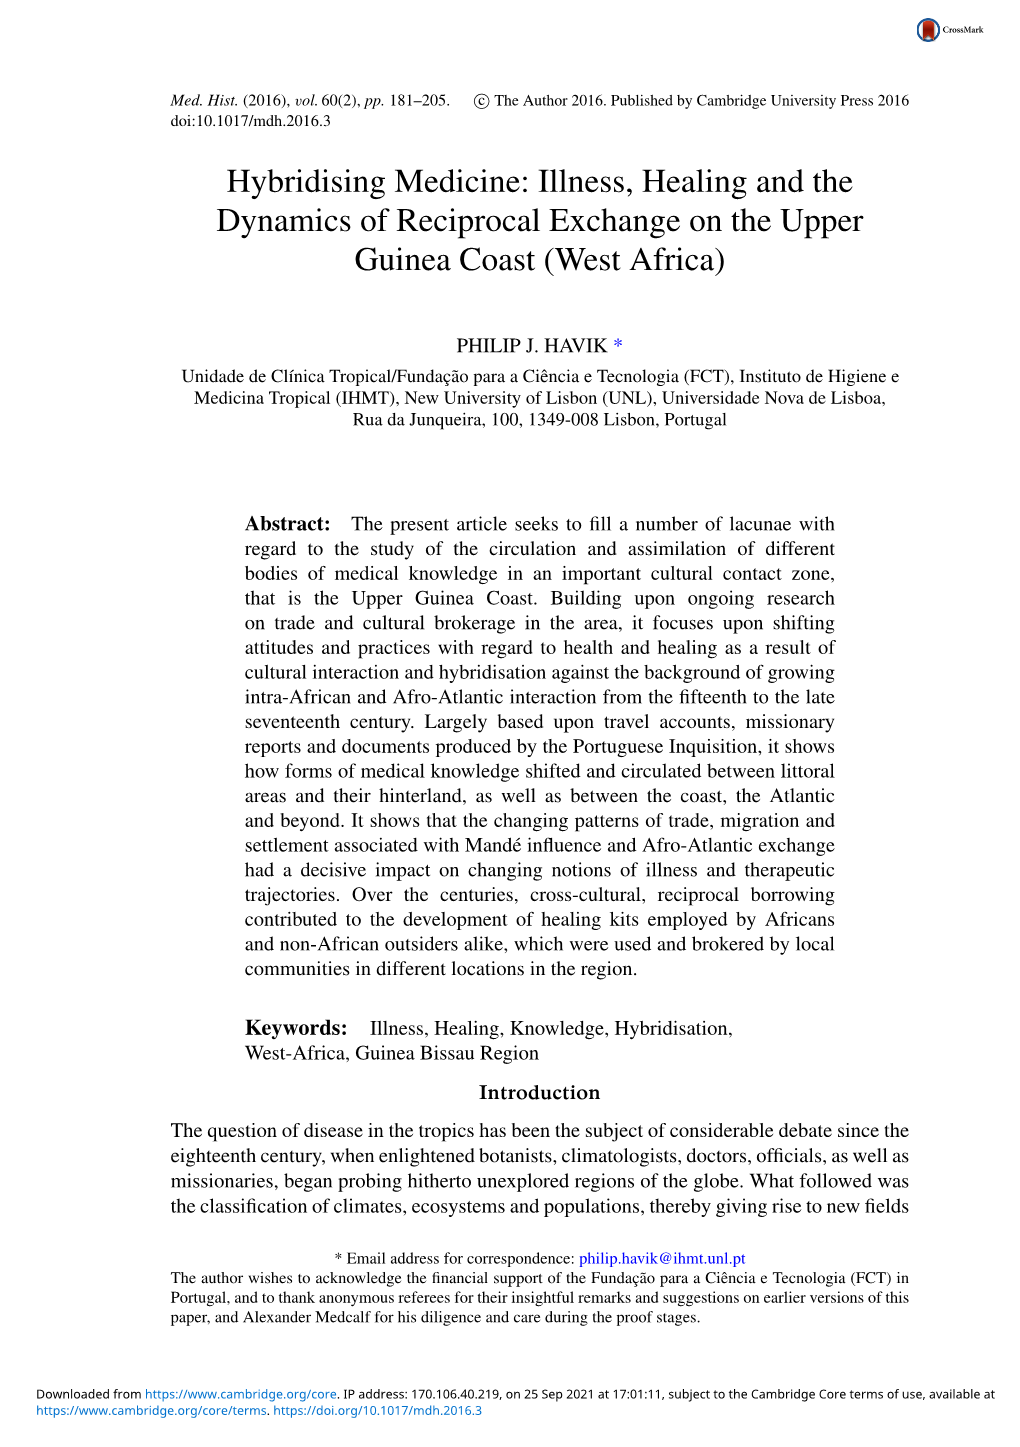 Illness, Healing and the Dynamics of Reciprocal Exchange on the Upper Guinea Coast (West Africa)